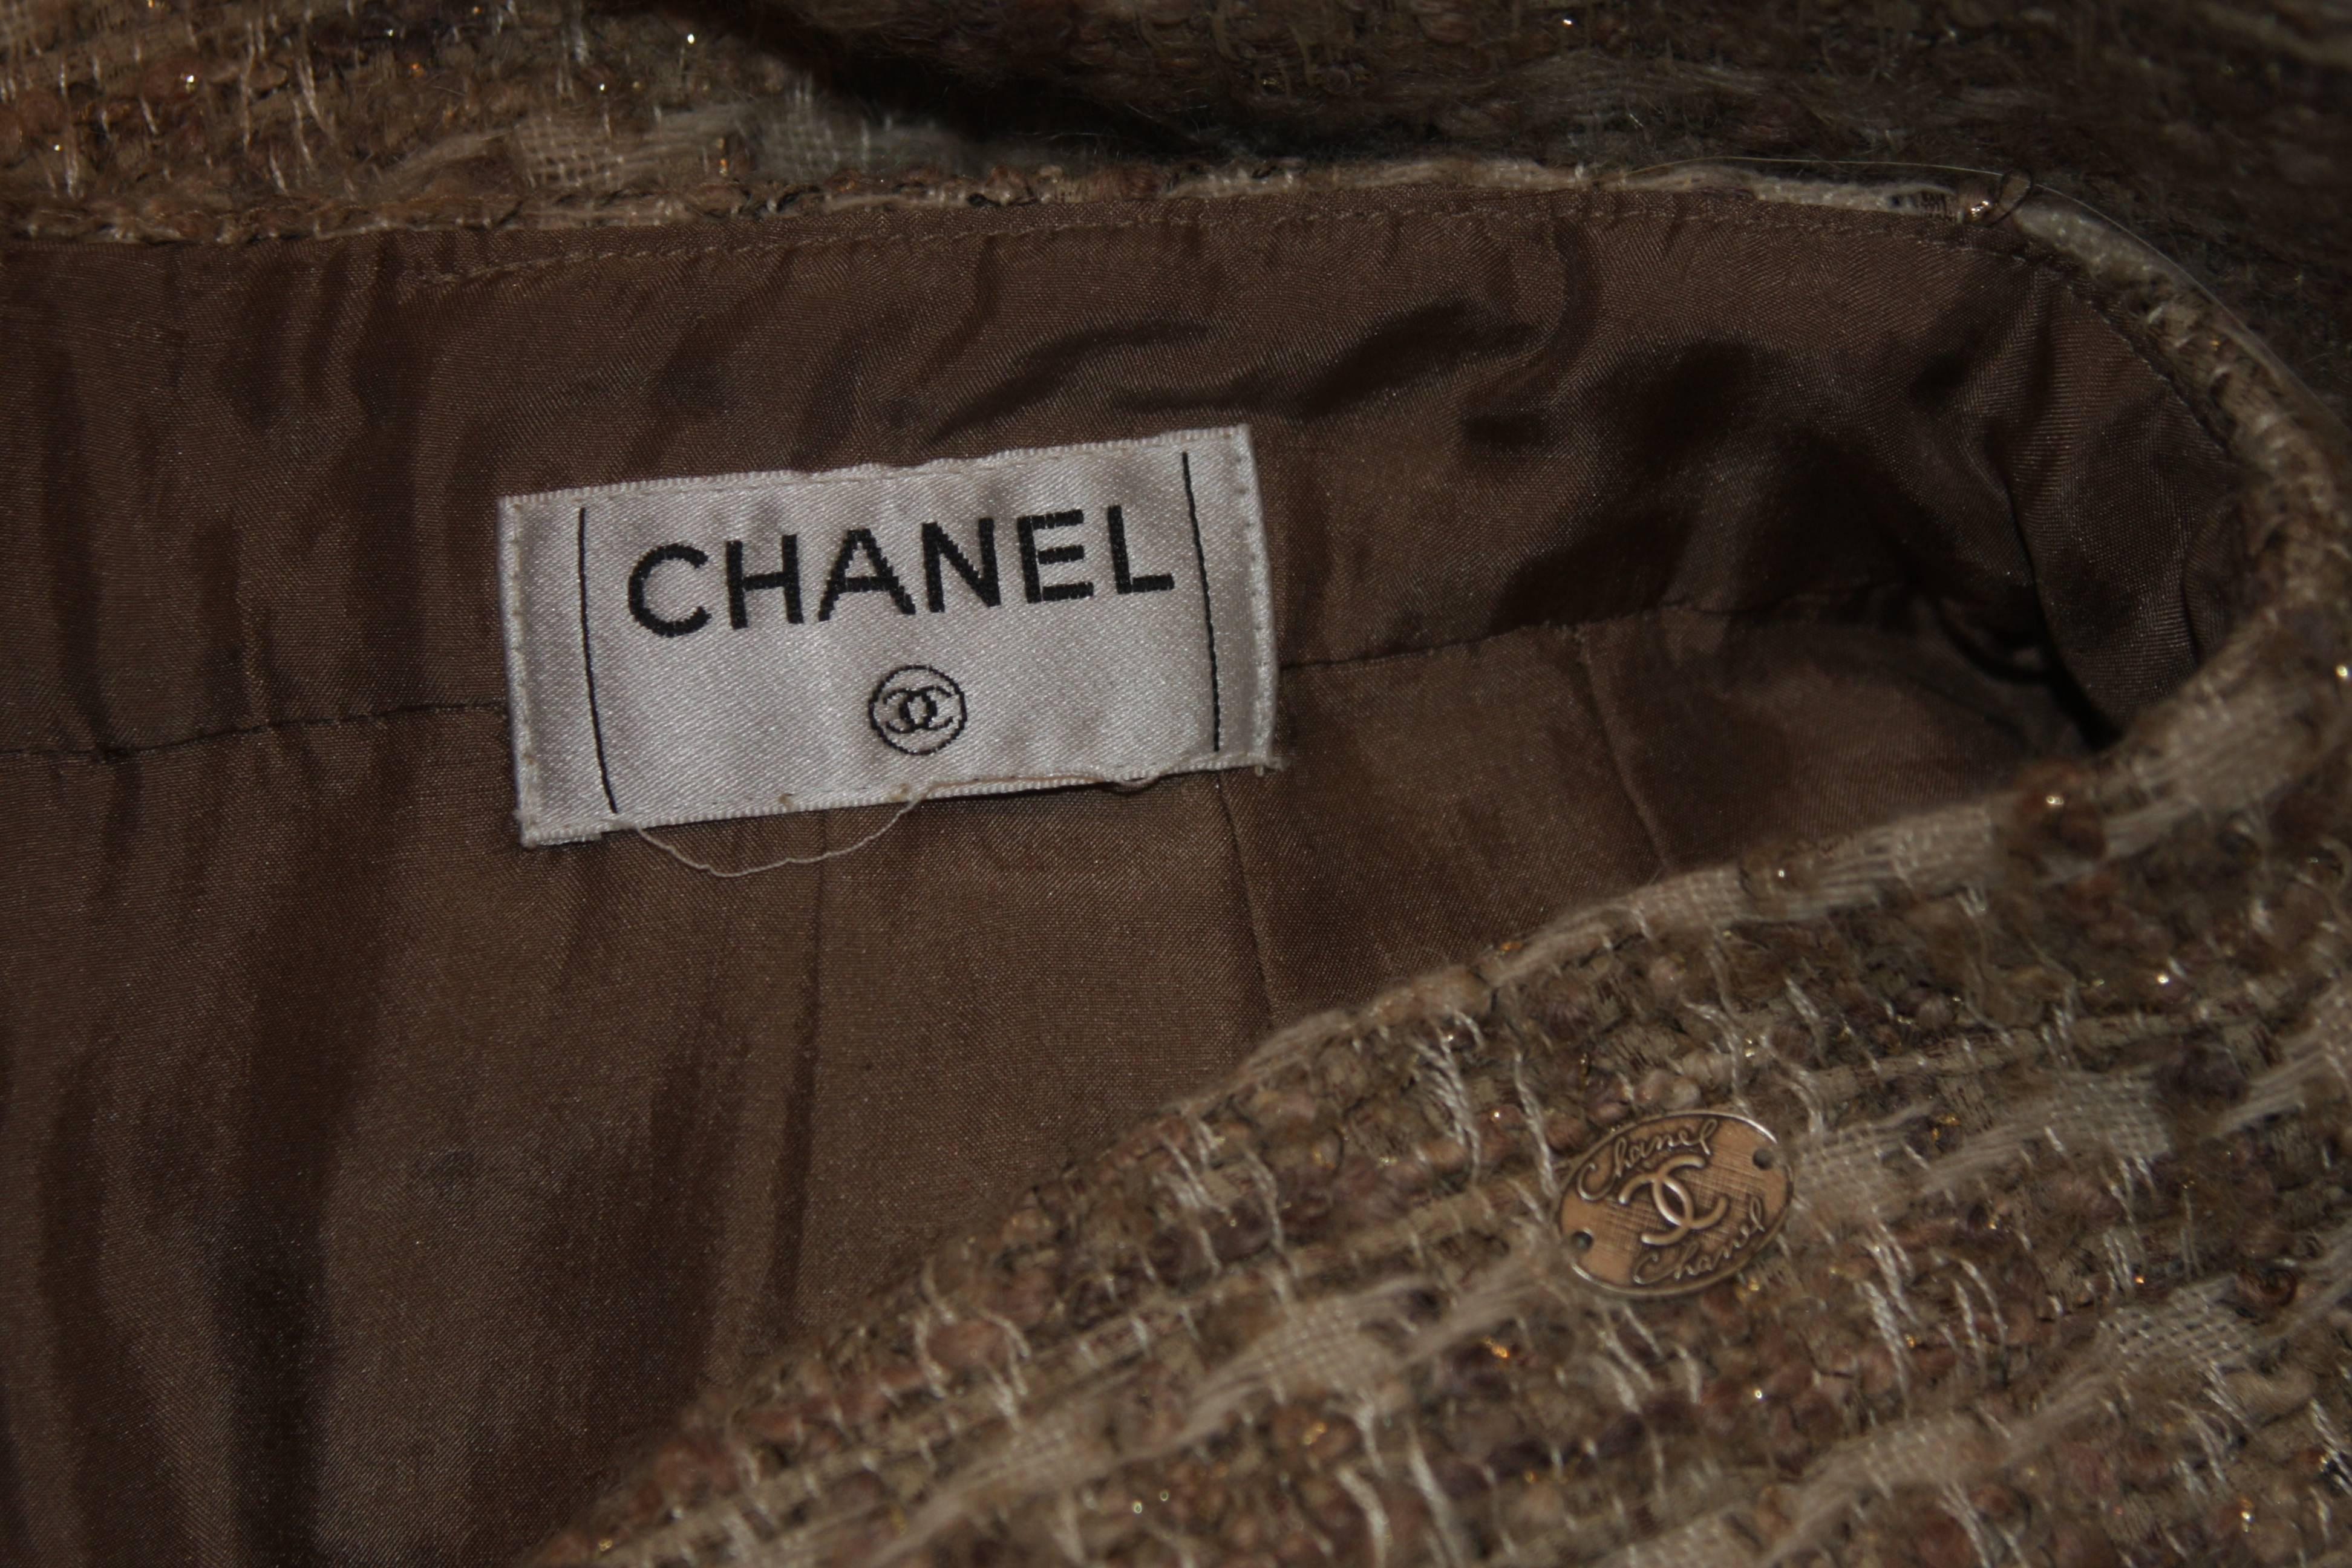 CHANEL Nude Tweed Knee Length Skirt with Brown Metallic Detail Size 6-8 6